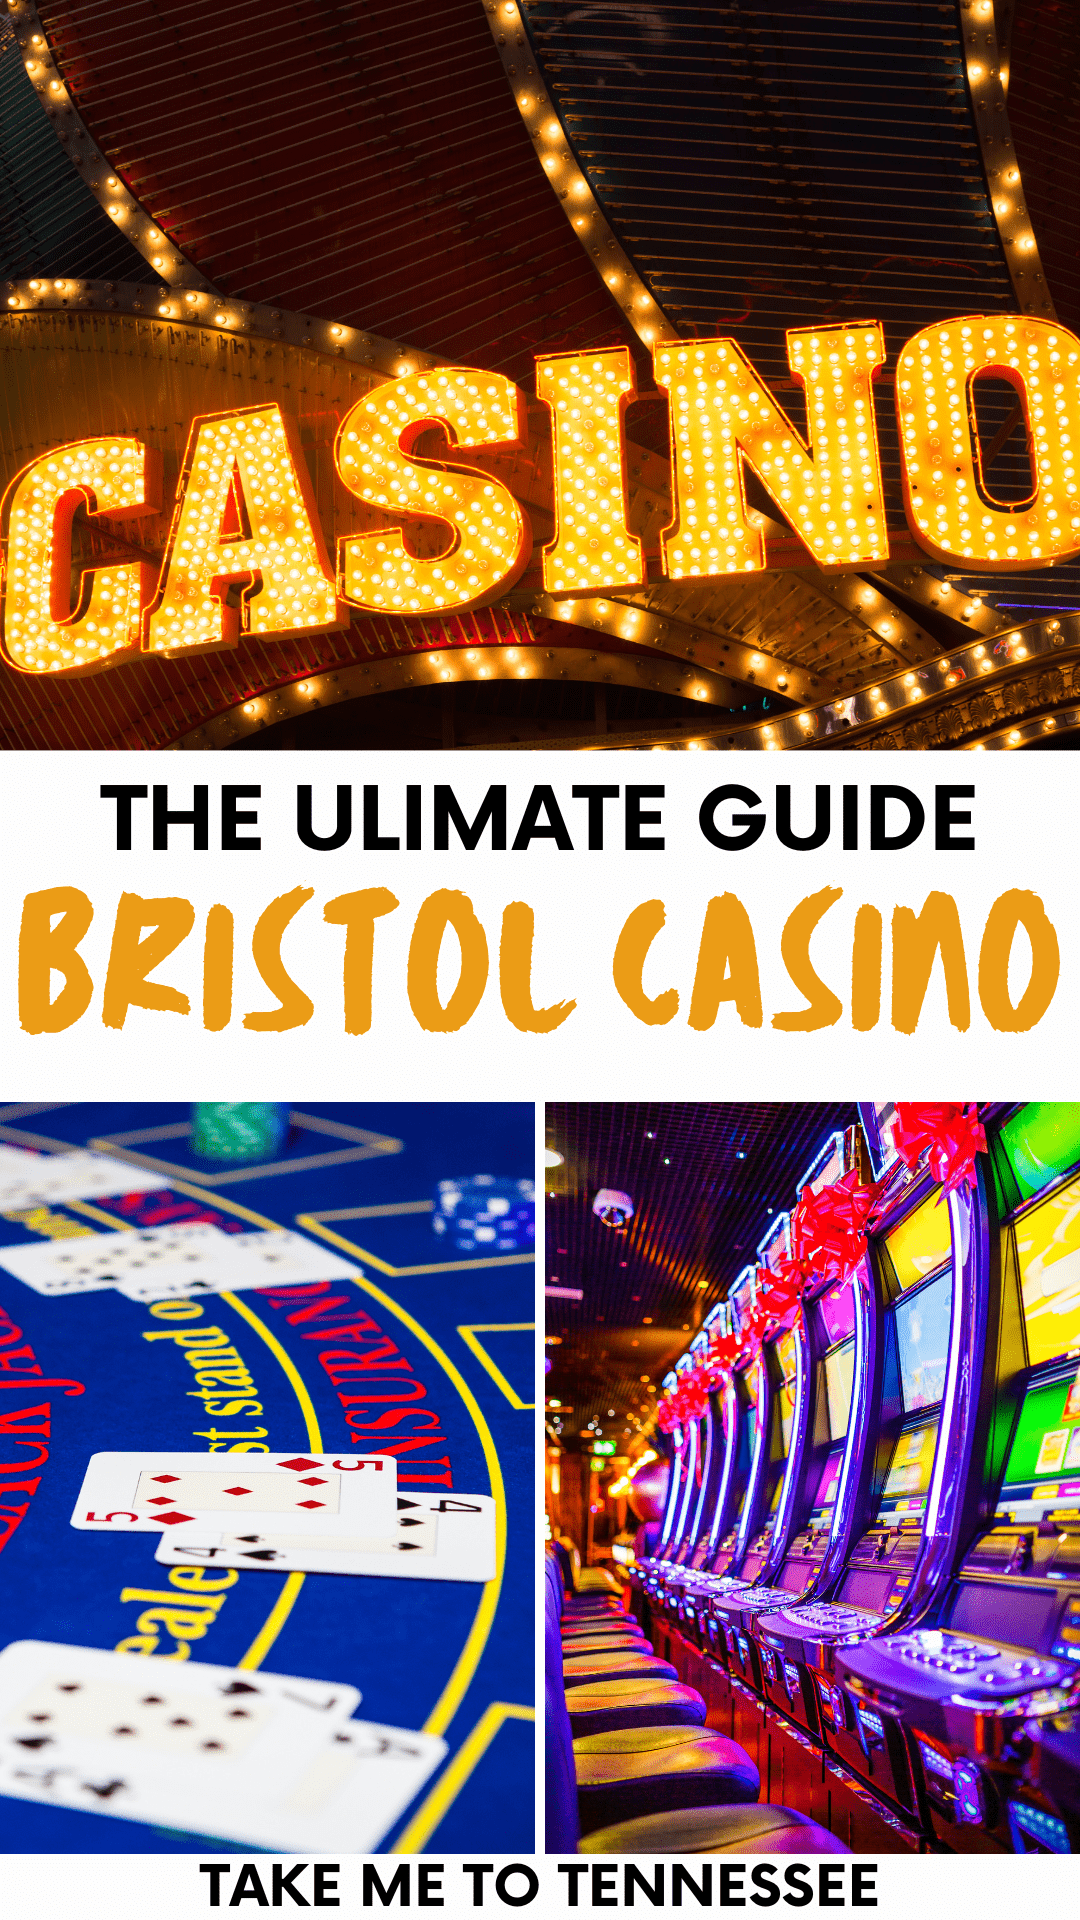 THE ULTIMATE GUIDE FOR THE BRISTOL CASINO PINTEREST PIN